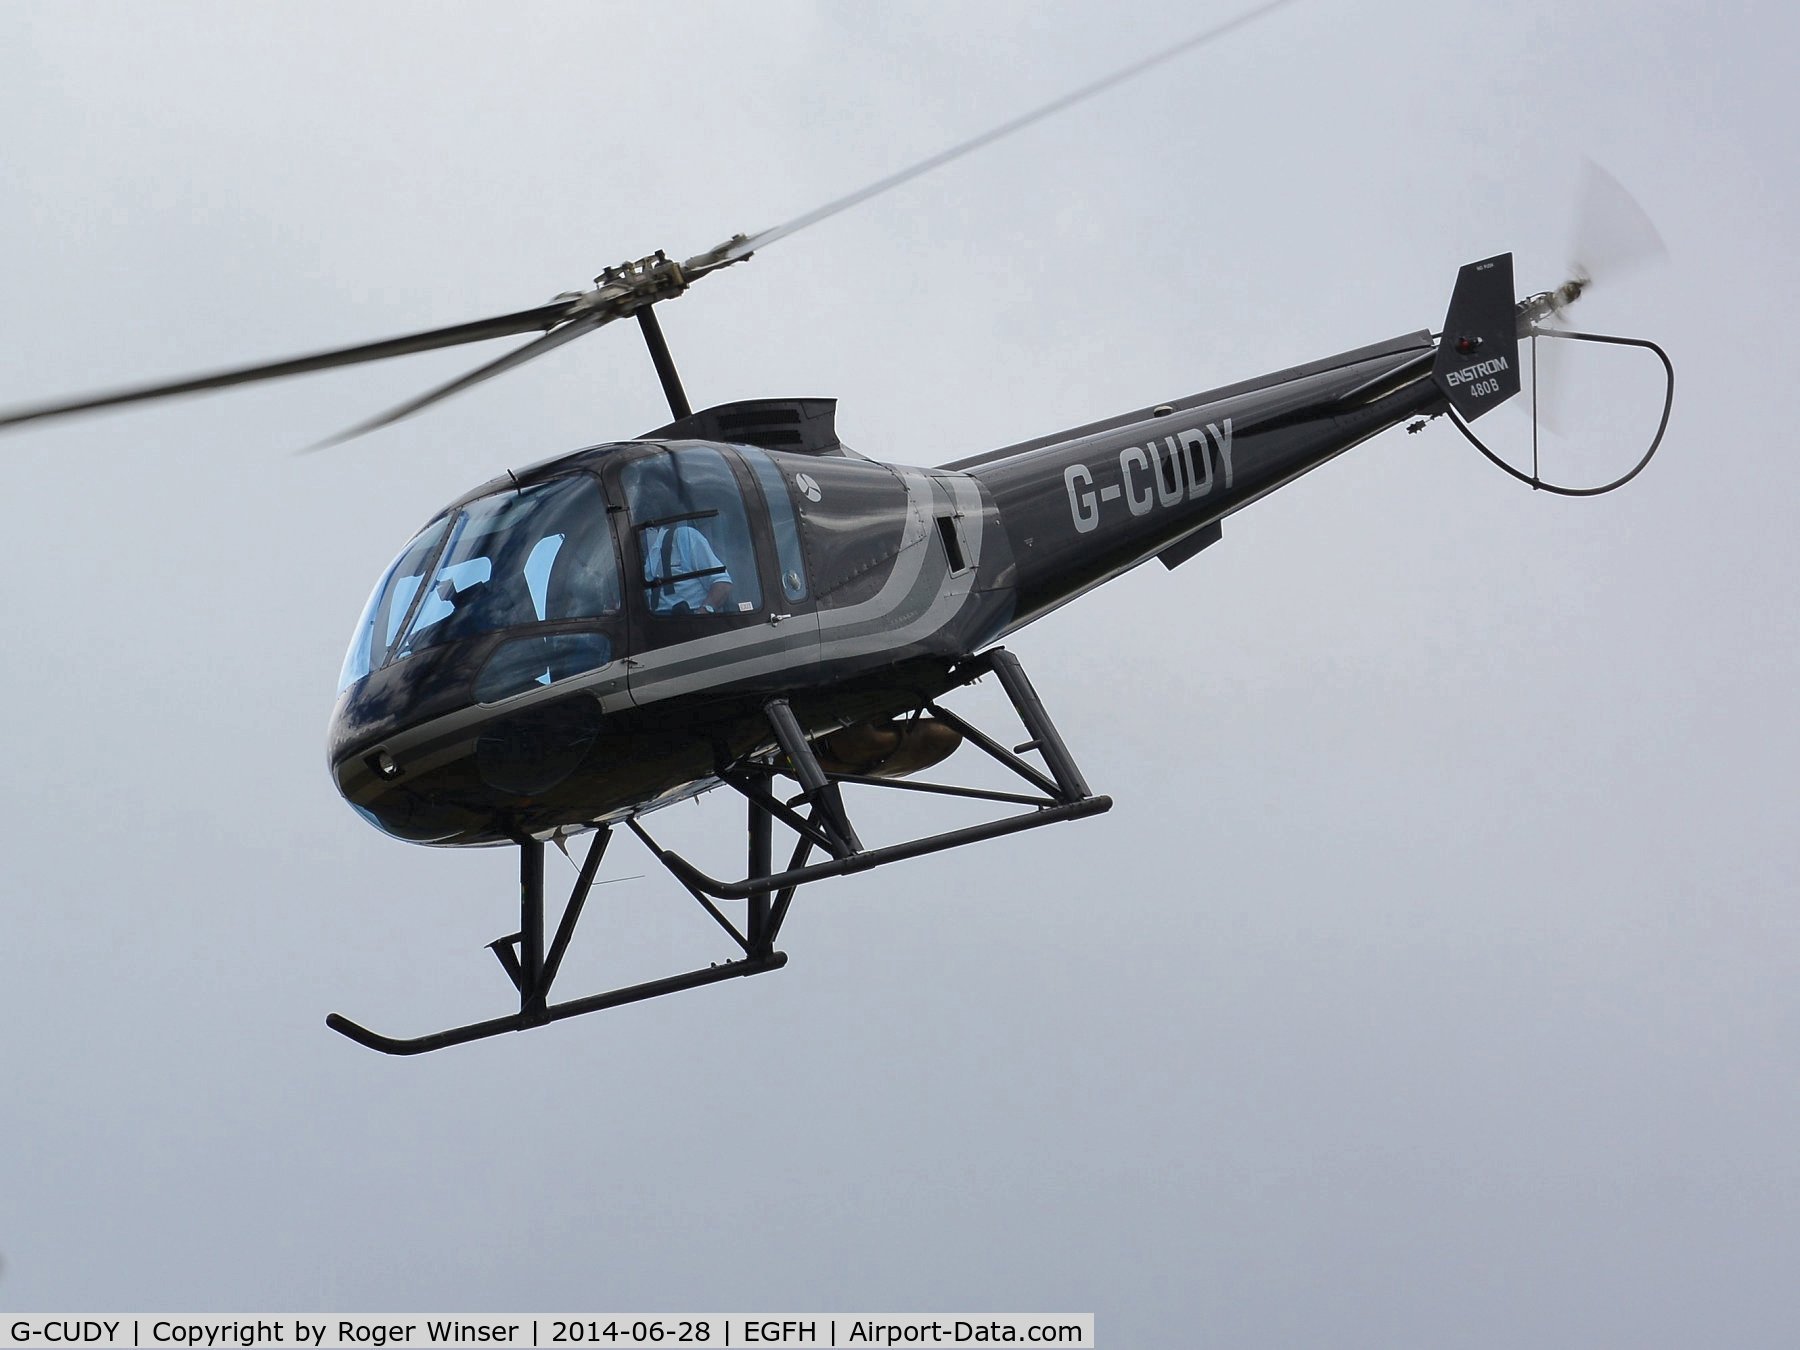 G-CUDY, 2005 Enstrom 480B C/N 5807, Visiting helicopter departing the airport.